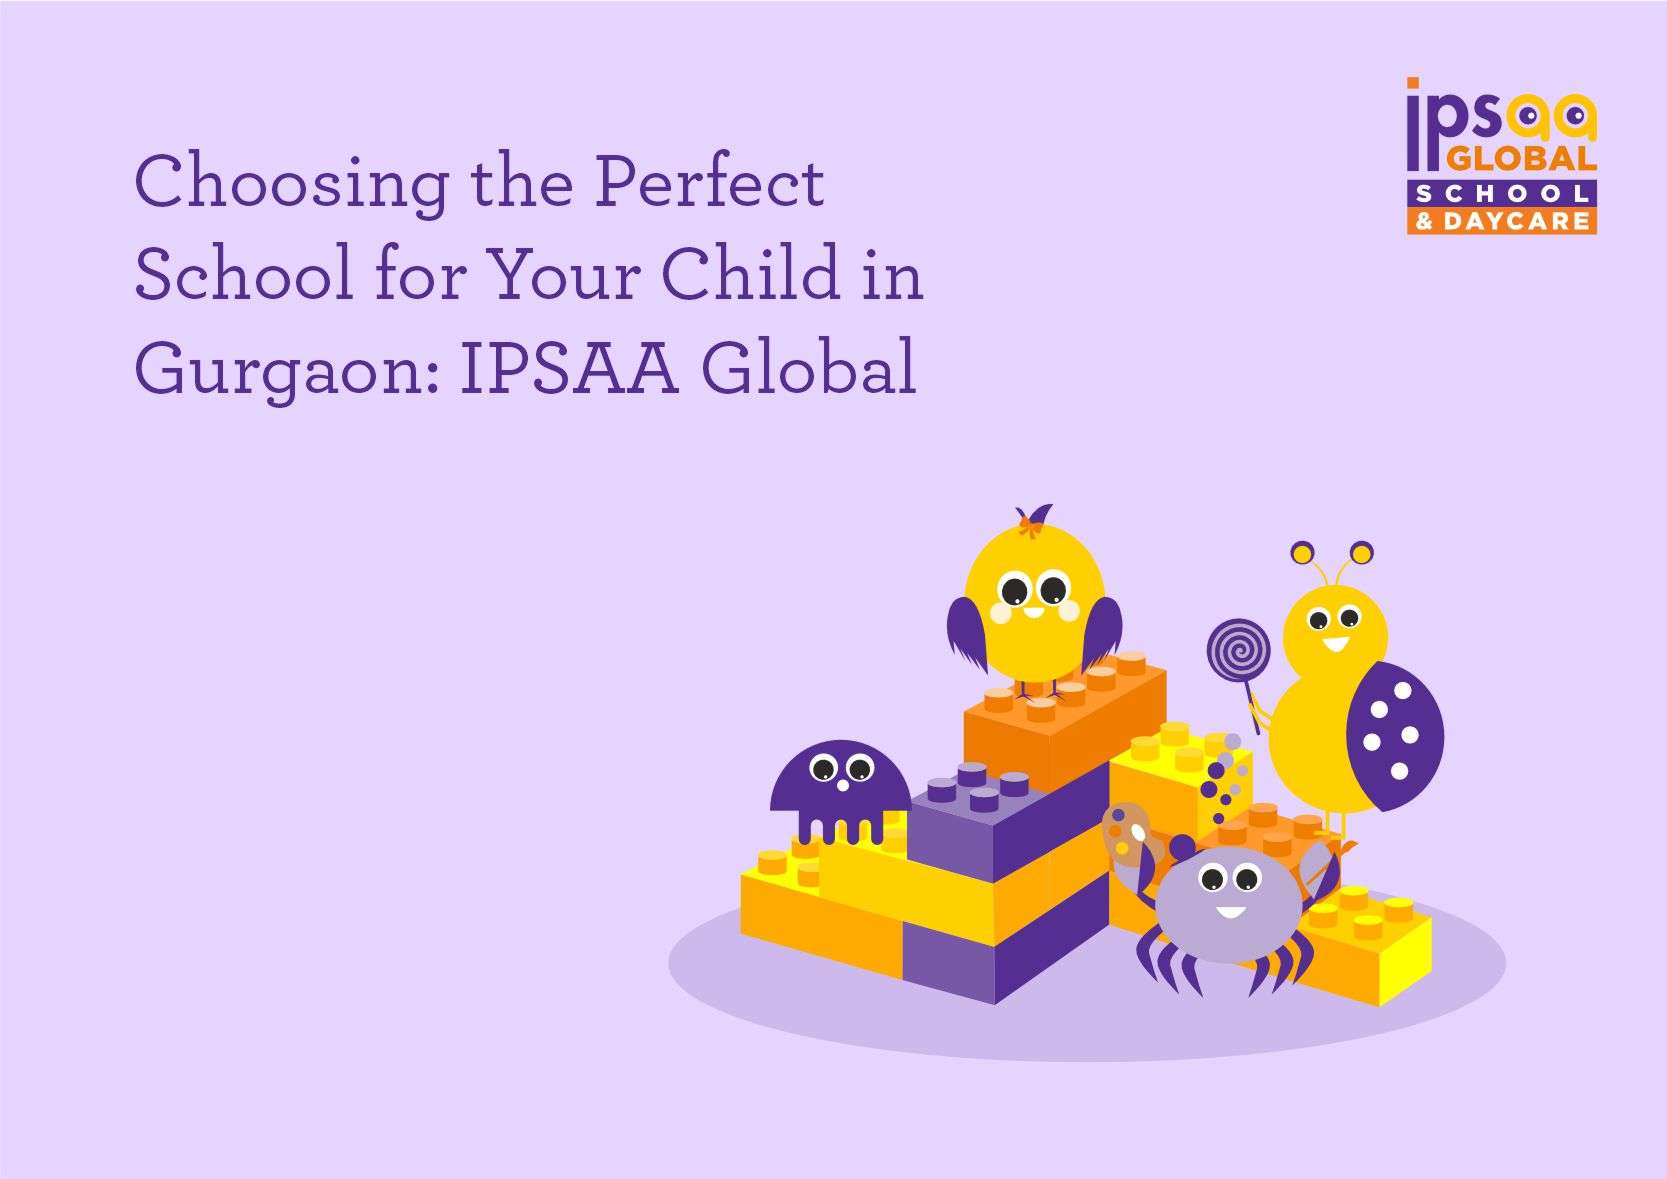 Choosing the Perfect School for Your Child in Gurgaon: IPSAA Global